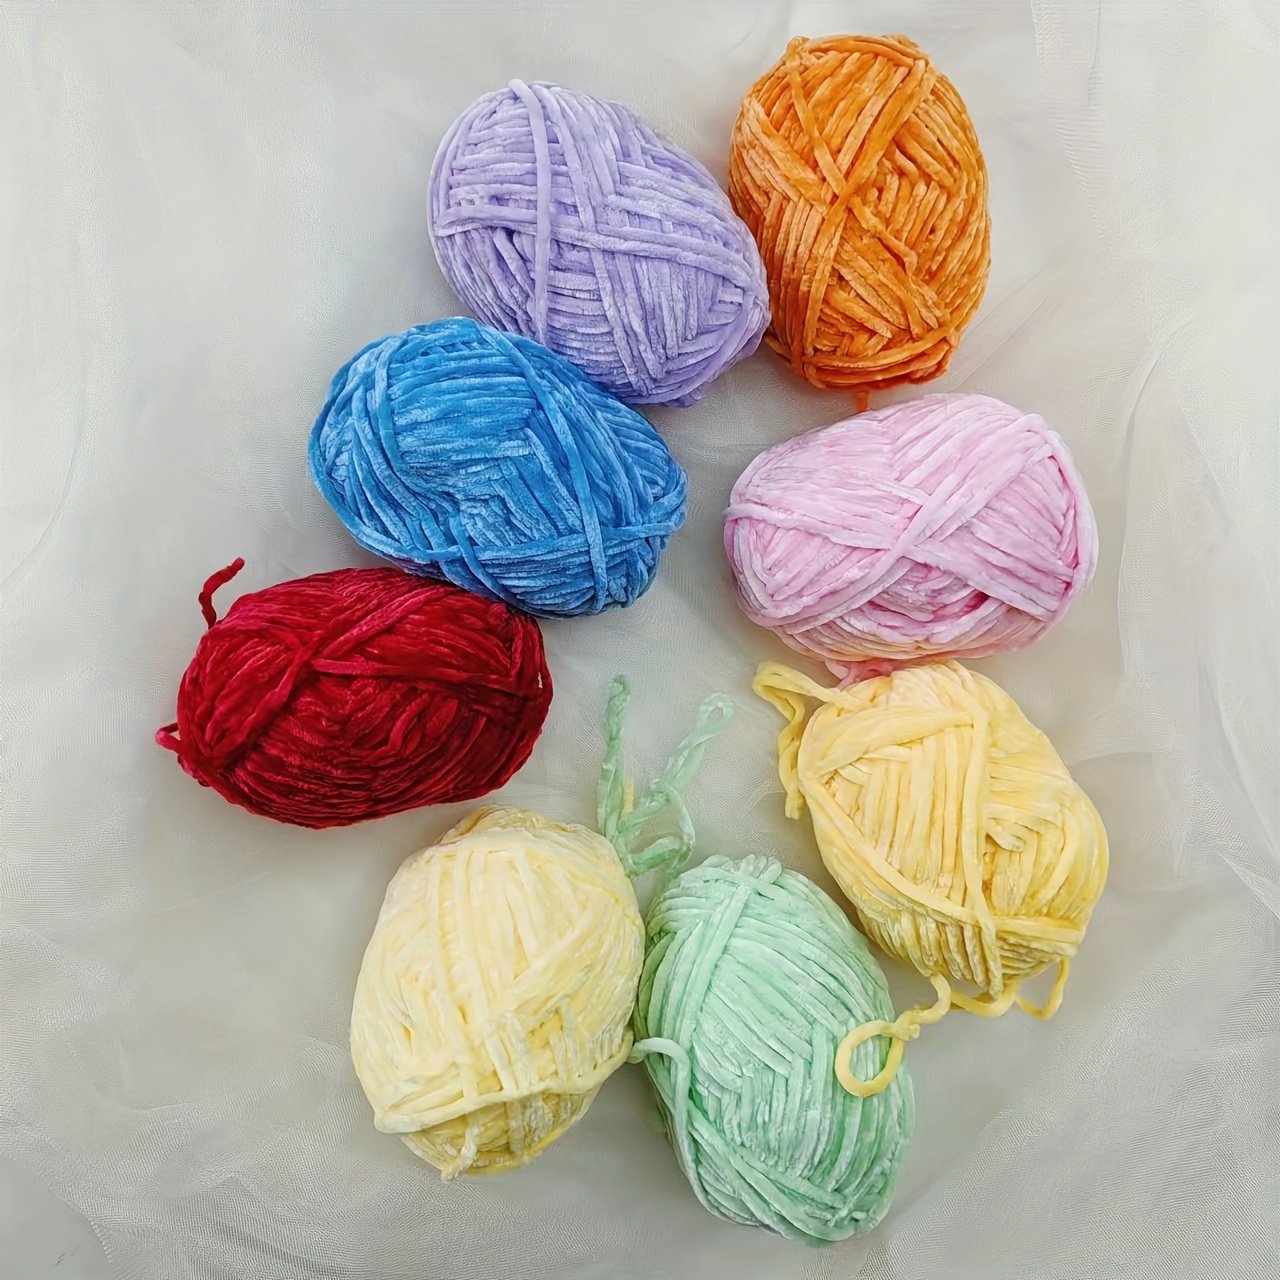 

6-piece Mixed Color Chenille Yarn Set, 50g Each - Perfect For Diy Crochet & Knitting Projects Like Halloween Dolls, Christmas Hats, Carpets & Pillows